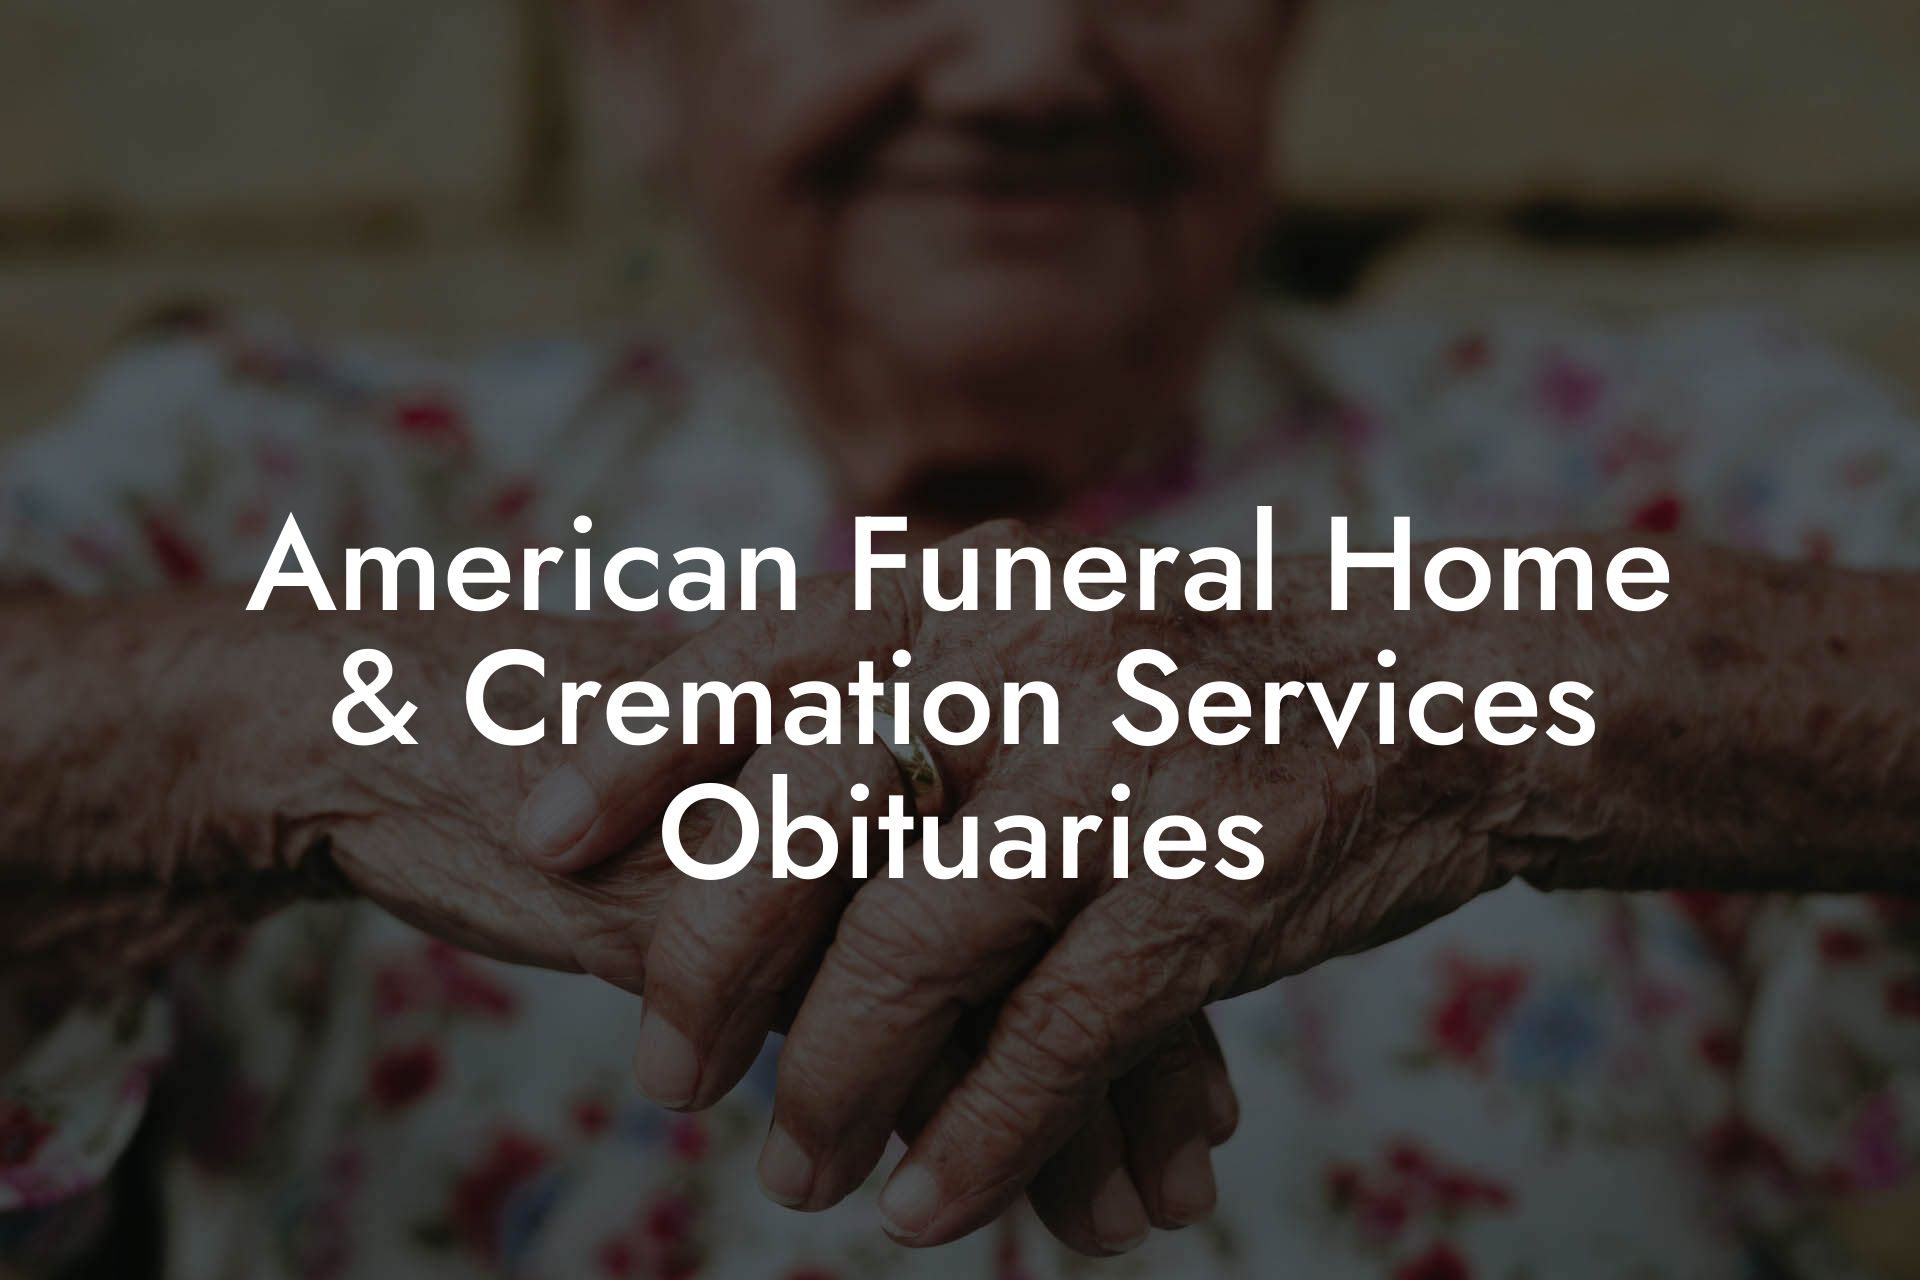 American Funeral Home & Cremation Services Obituaries